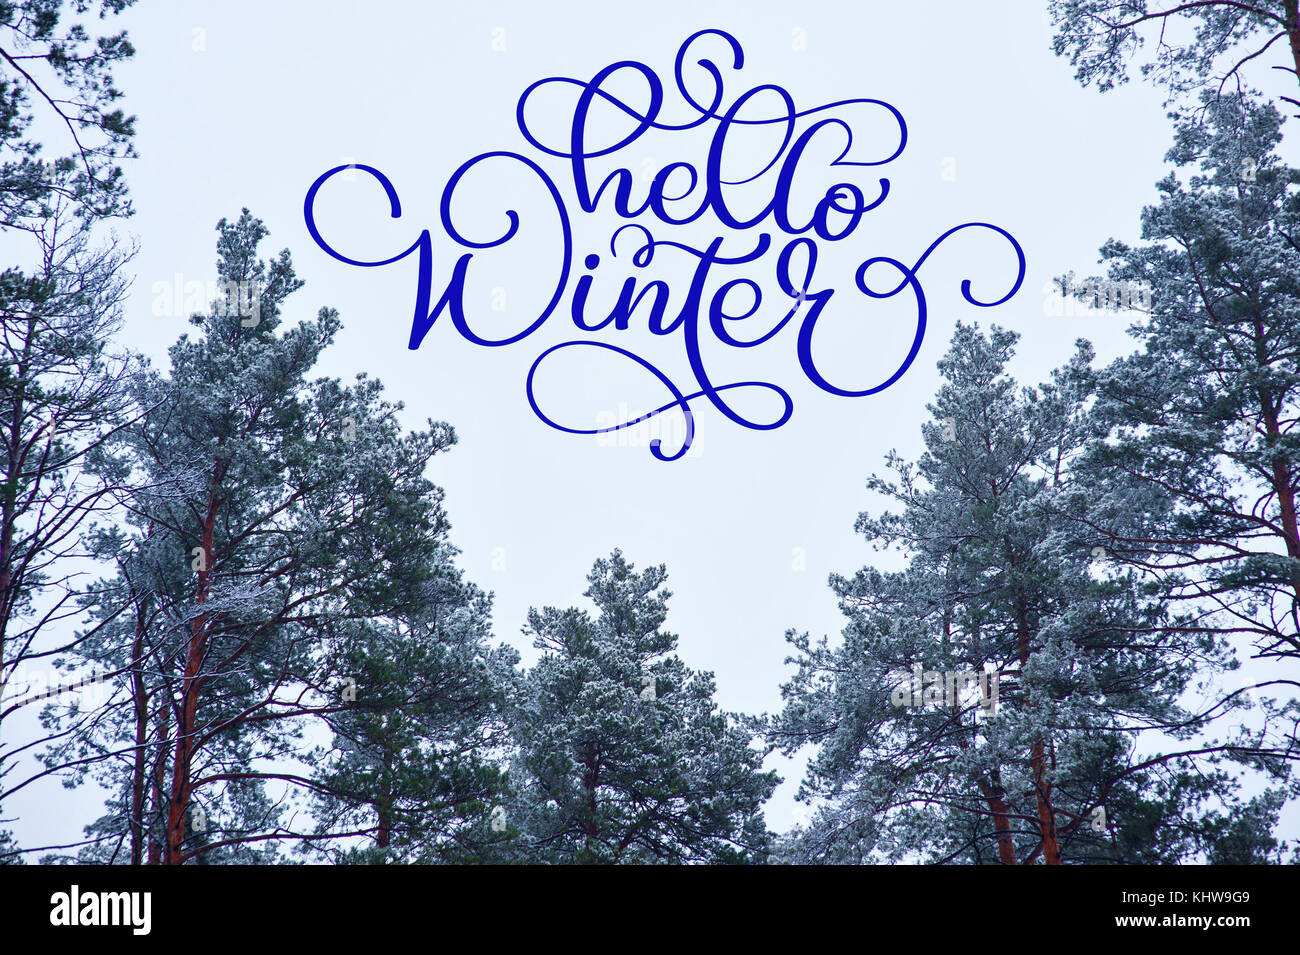 Hello Winter calligraphy text on a greeting card with a snow-covered forest of Christmas trees Stock Photo